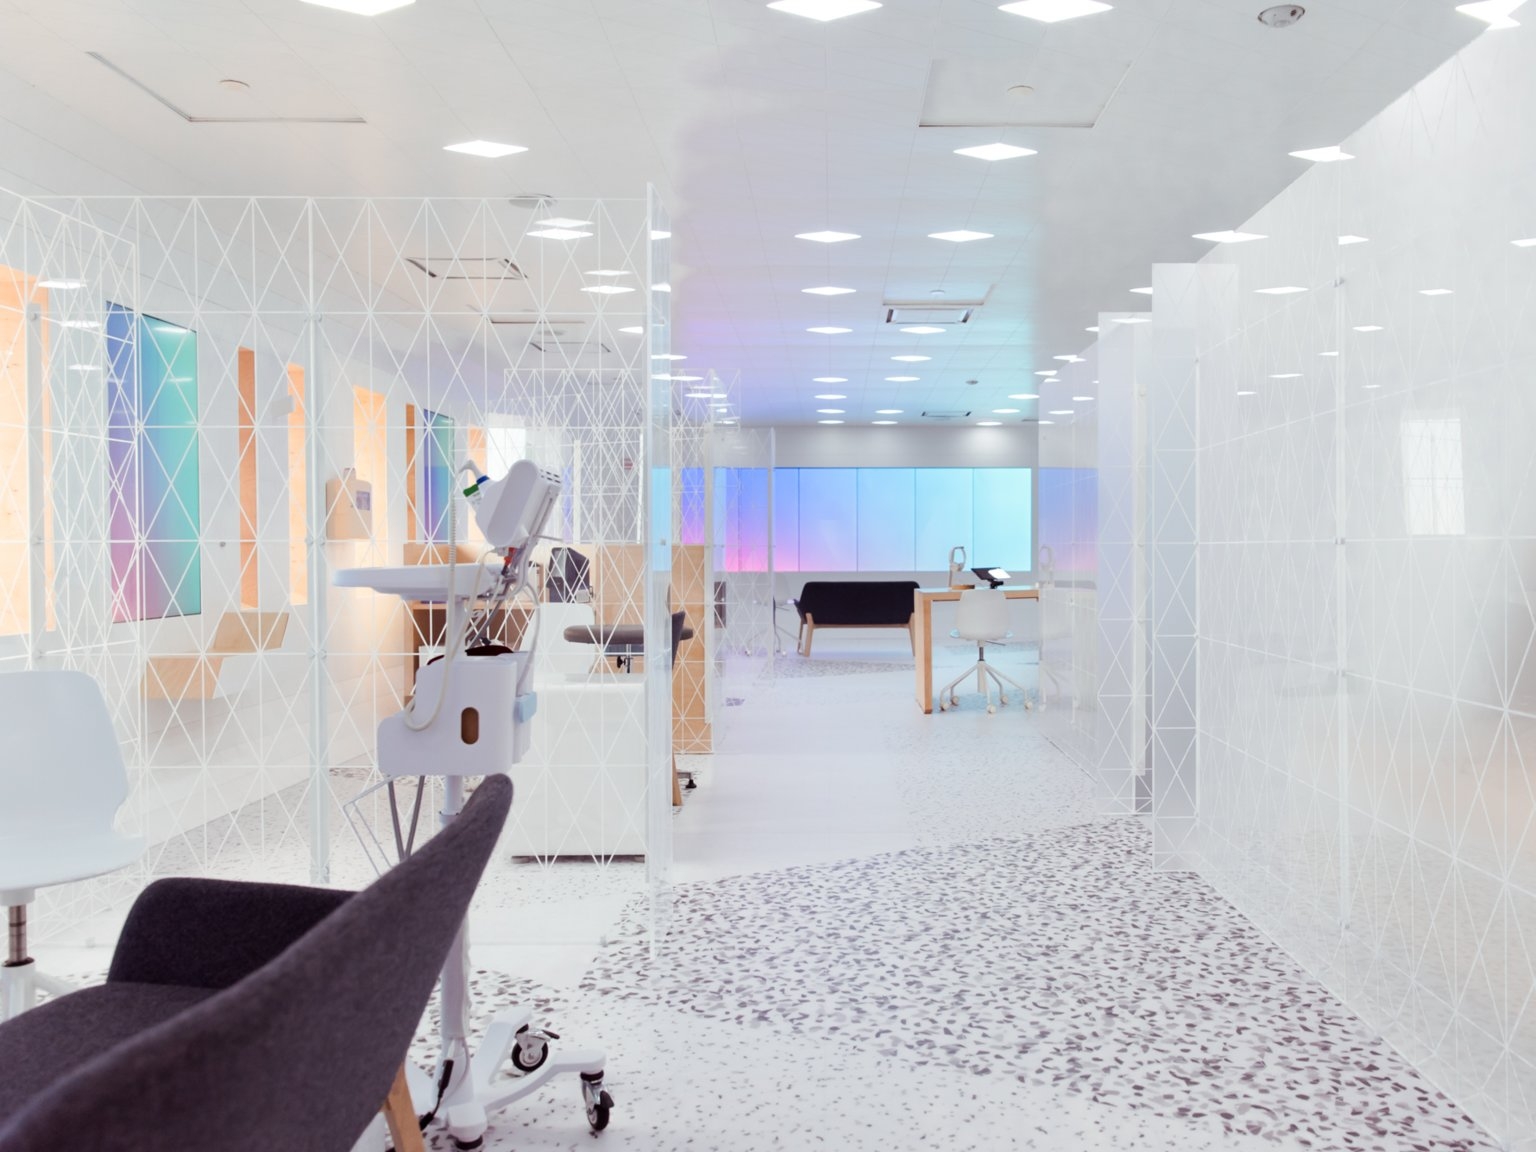 Image of a futuristic-looking lab with white walls and colored screens